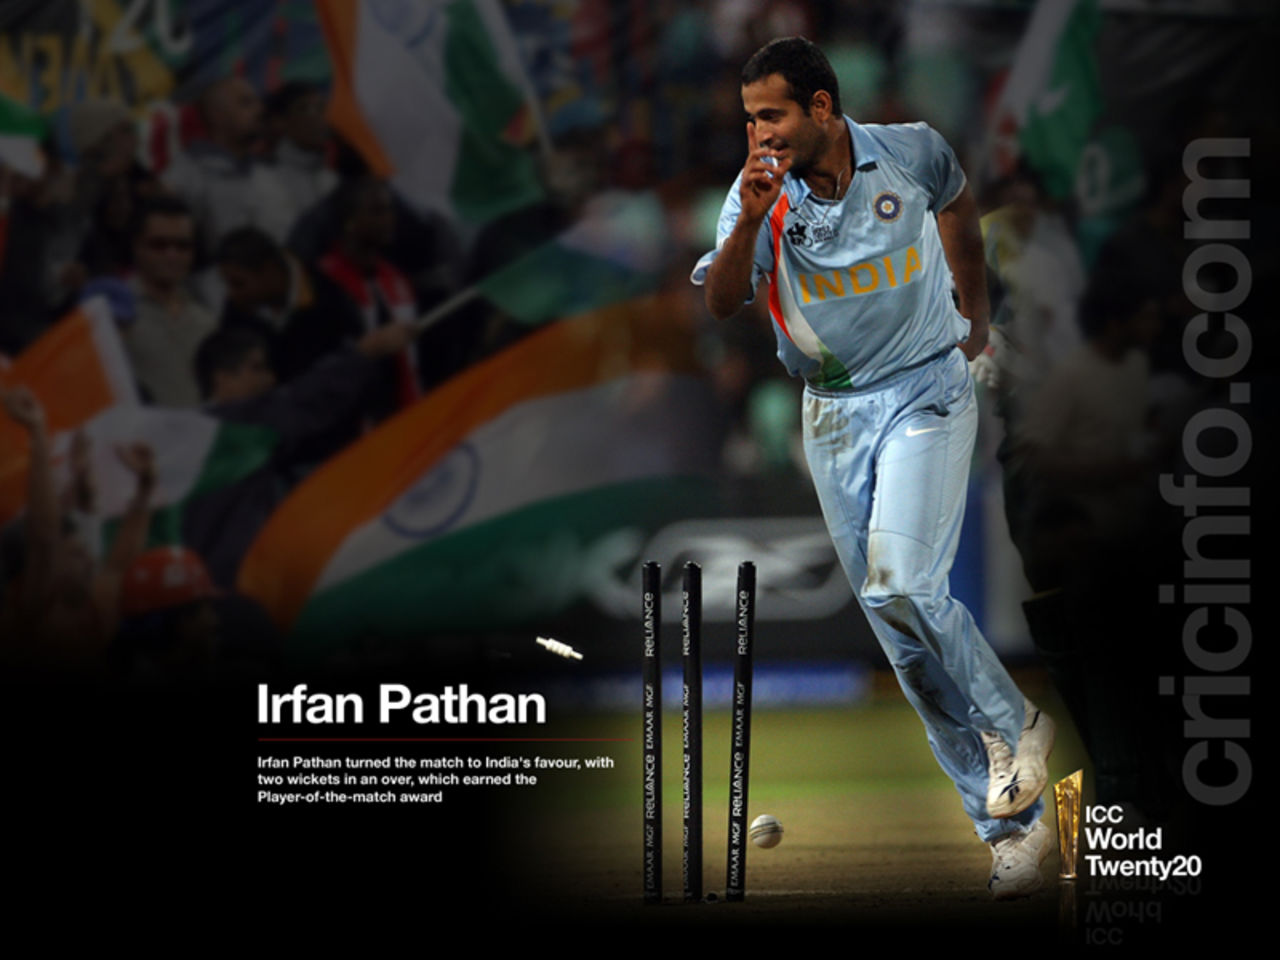 Irfan Pathan, the player-of-the-match